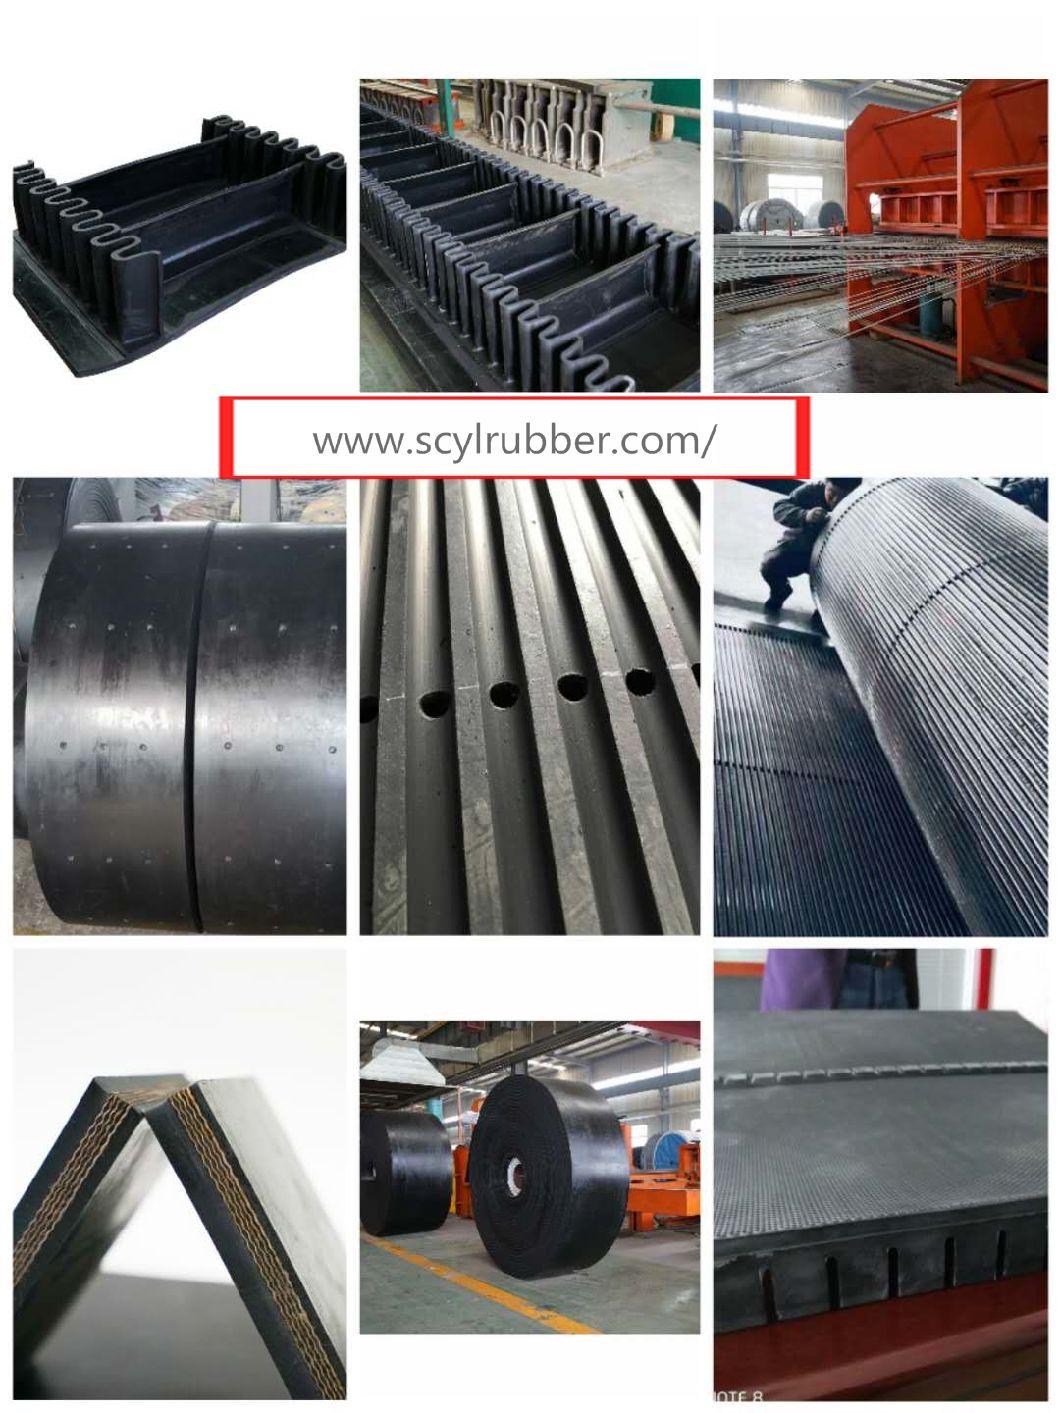 Quality Assurance Conveyor Belts Bb Cover with High Tensile for Power and Mining